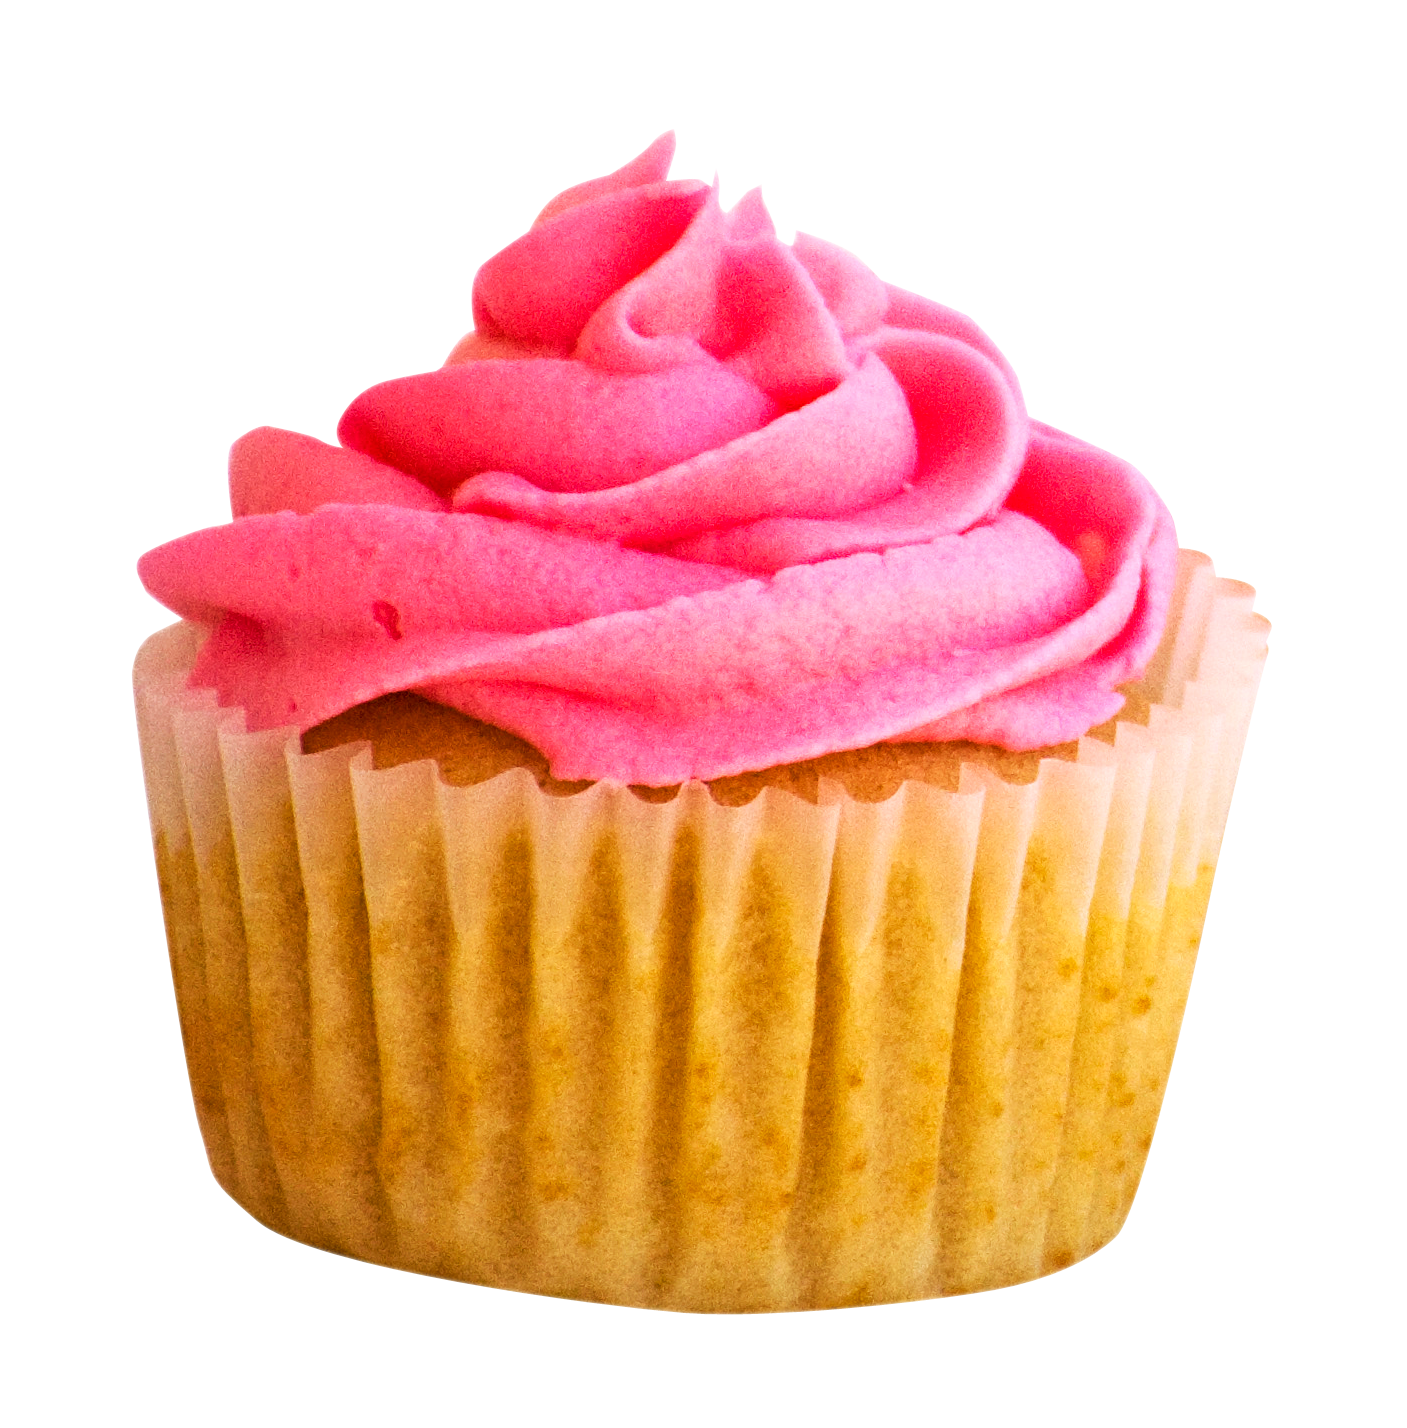 Pink Frosted Cupcake Isolated